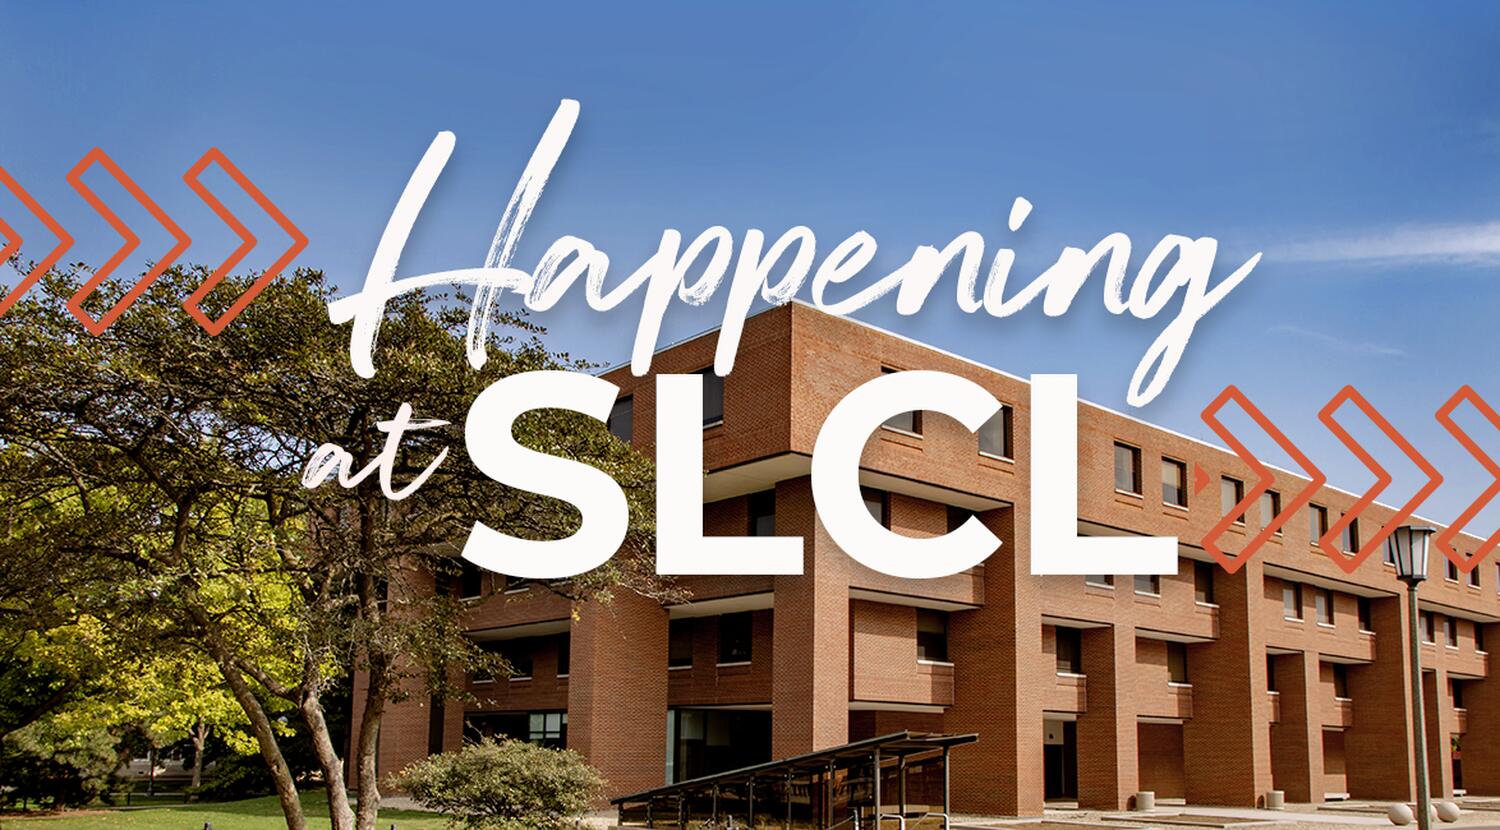 Summertime shot of the Foreign Languages Building on campus, with the text, "Happening at SLCL"